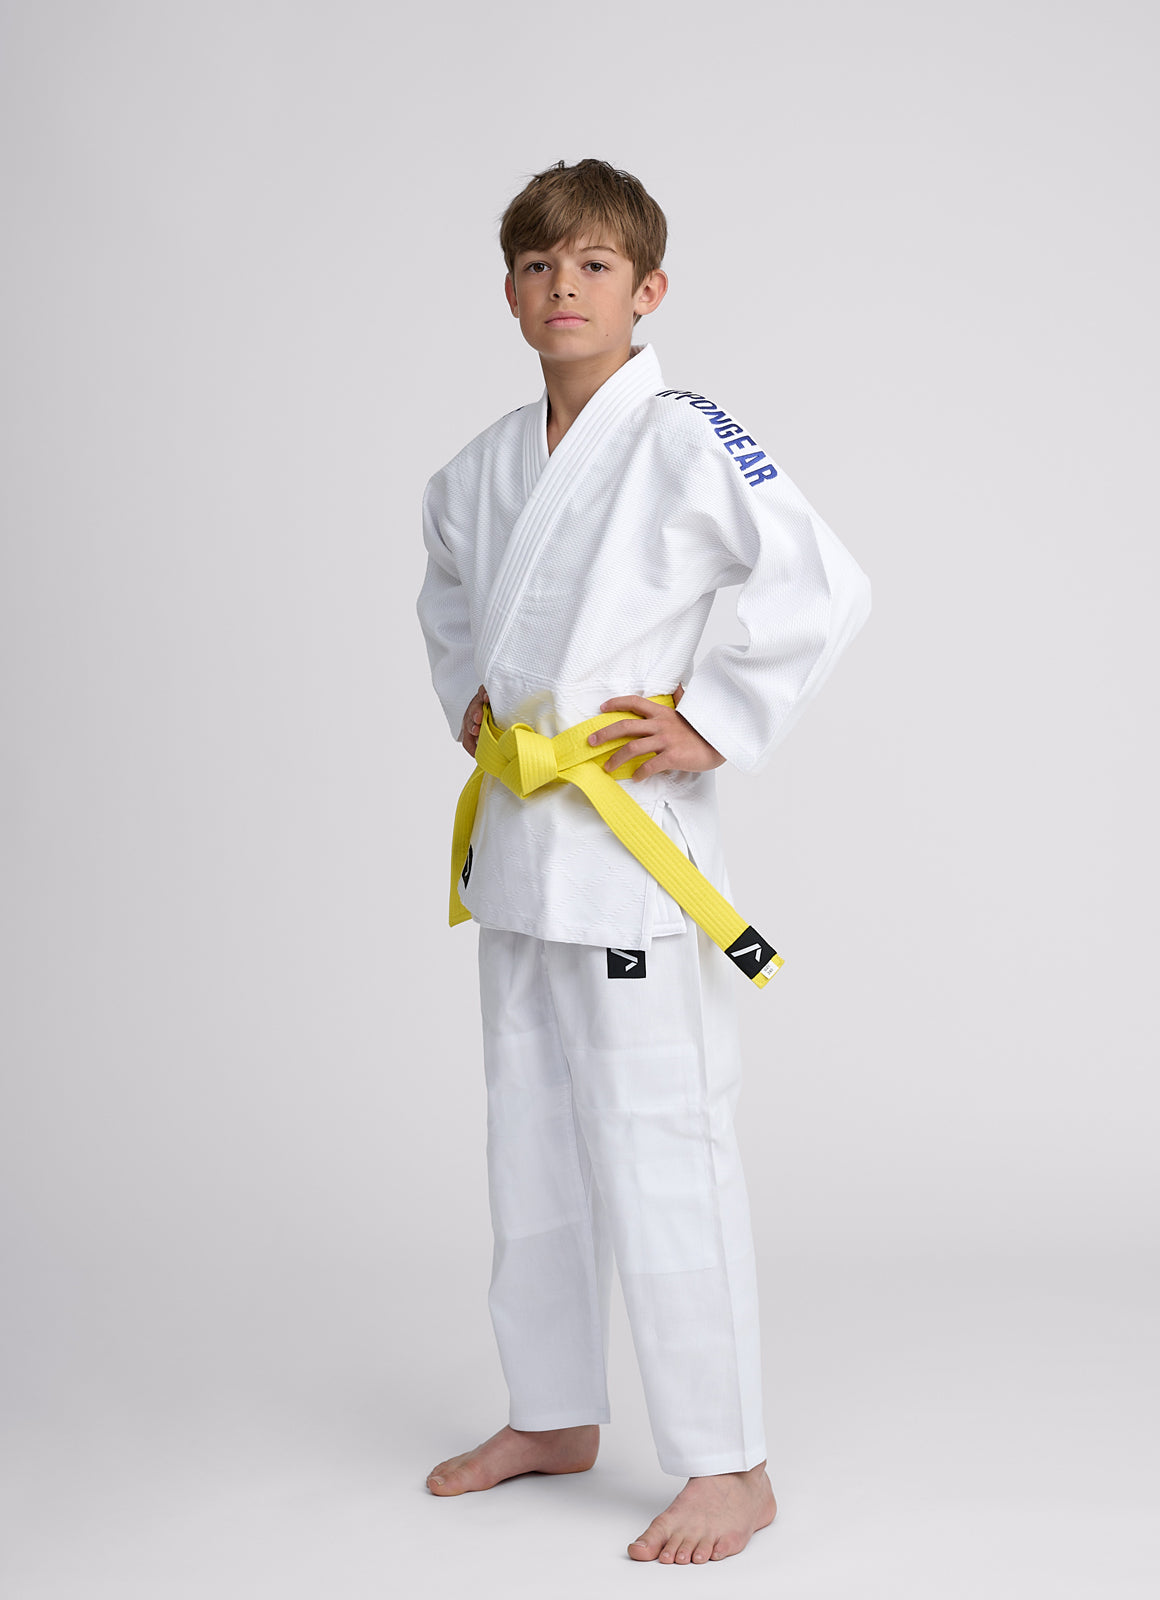 Adidas Judo Gi IJF approved clothing uniforms and equipment